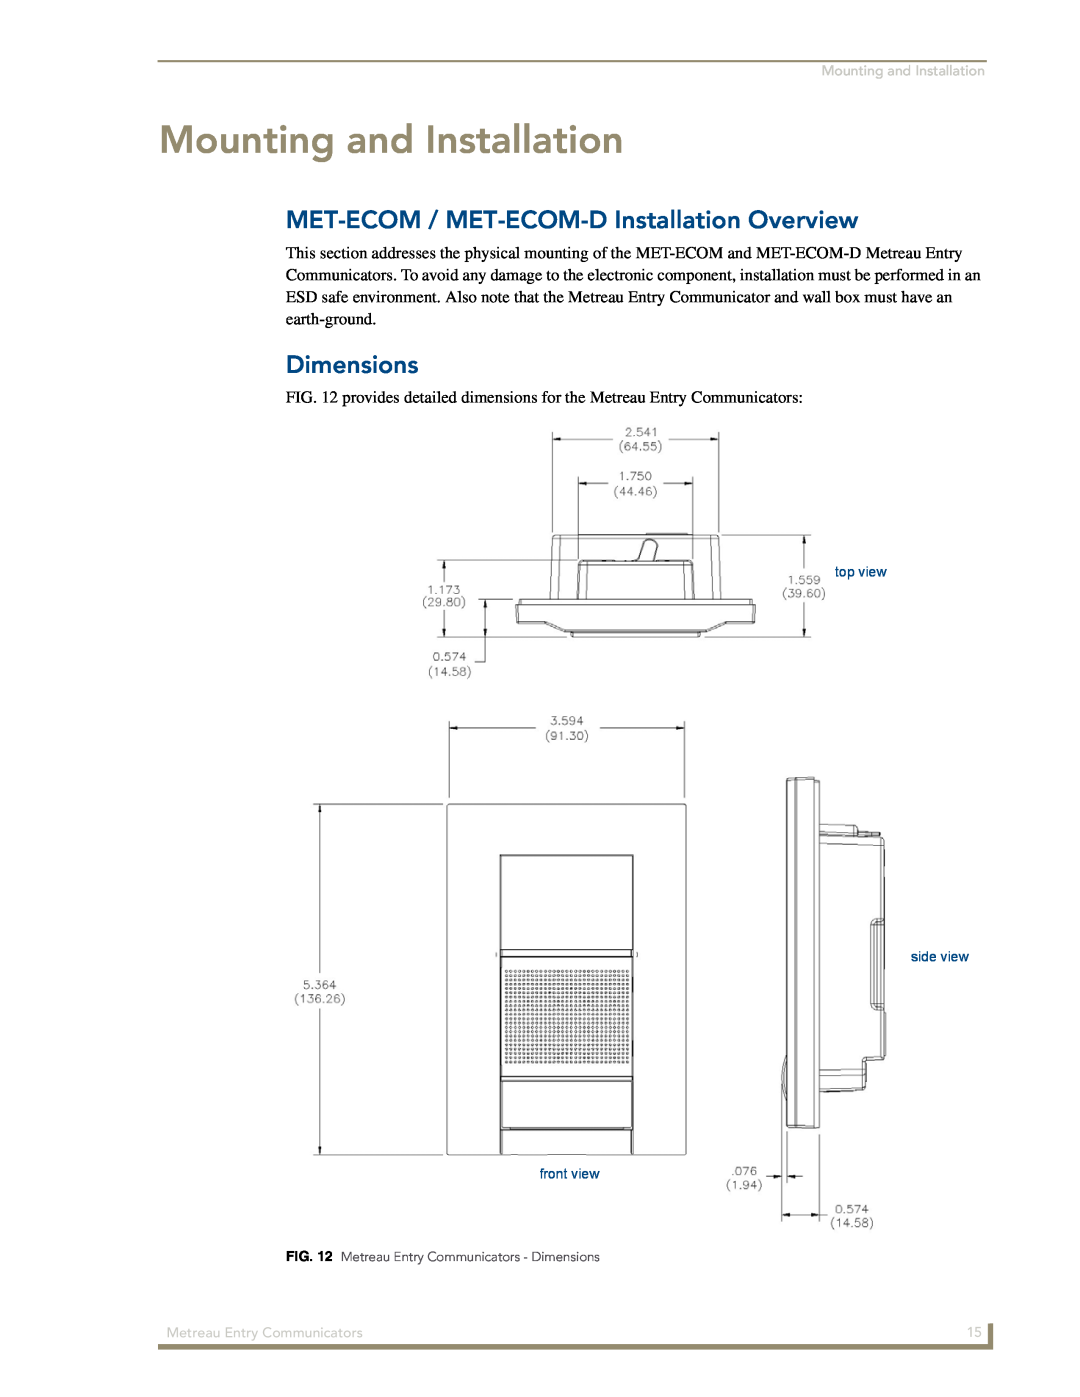 AMX manual Mounting and Installation, MET-ECOM / MET-ECOM-DInstallation Overview, Dimensions 